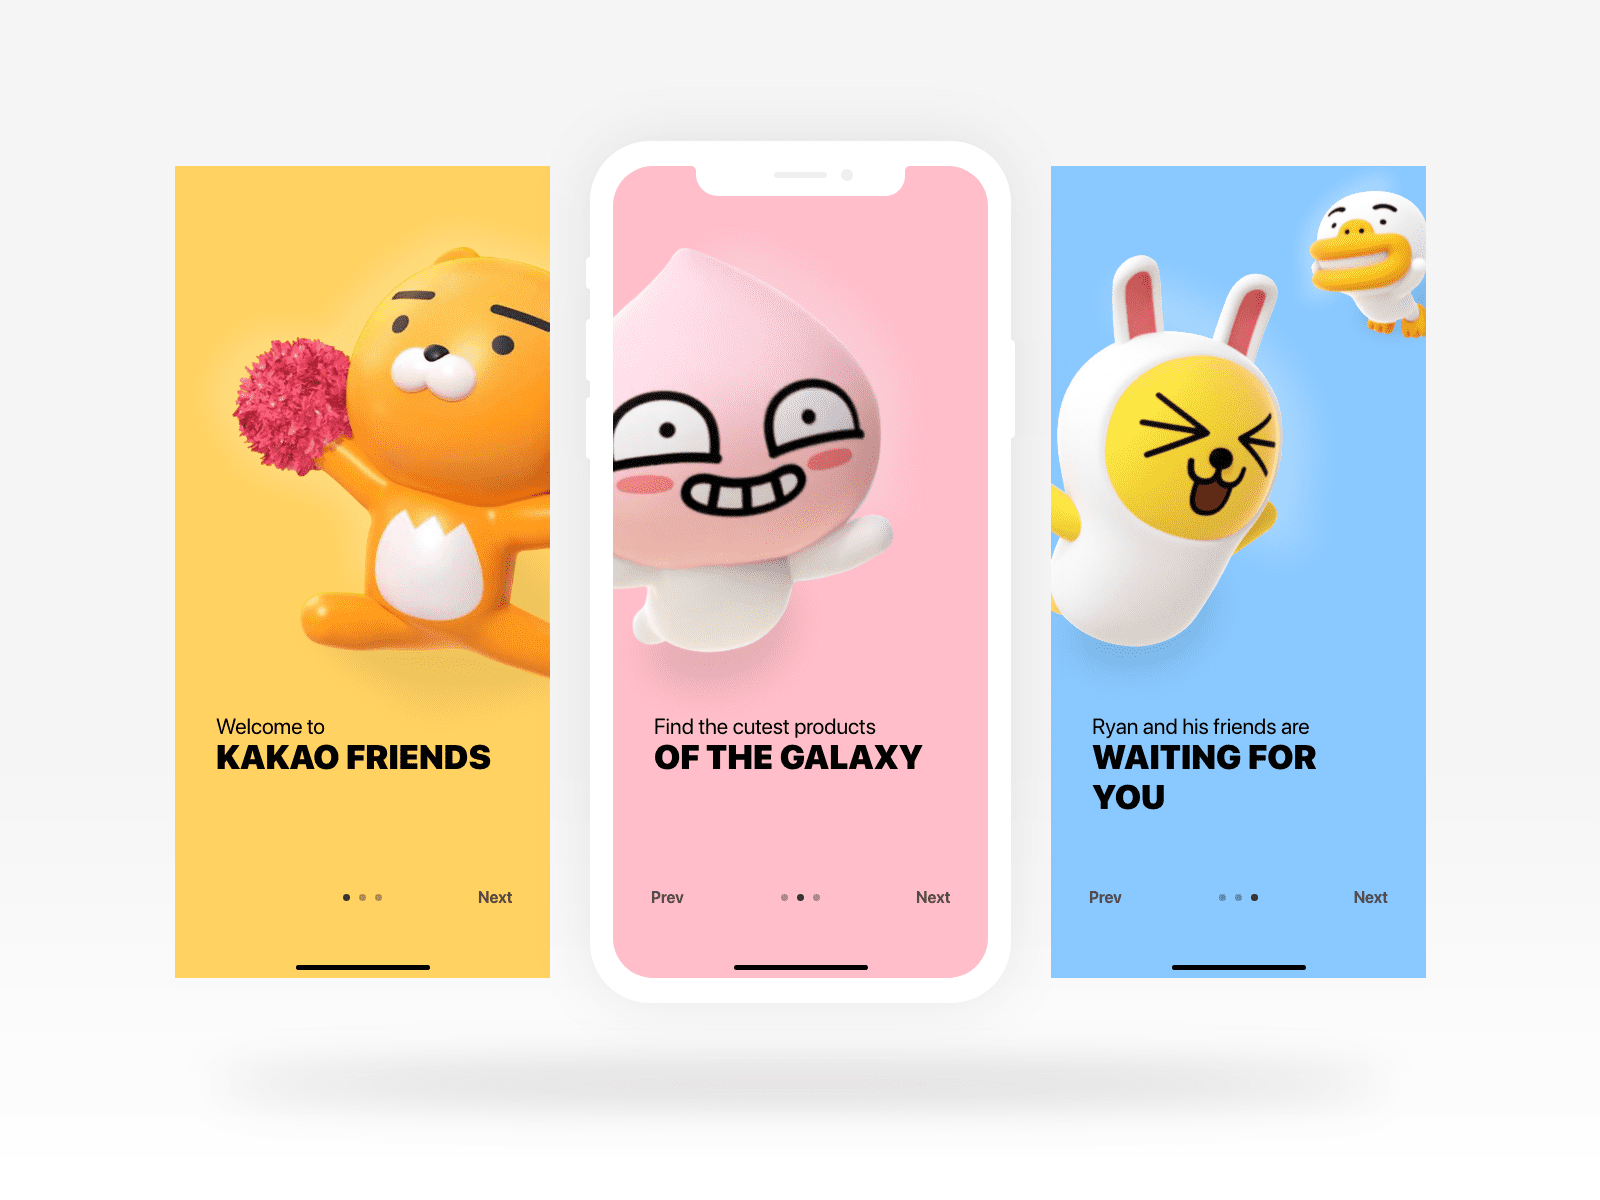 KakaoTalk’s customizable themes of their famous mascots